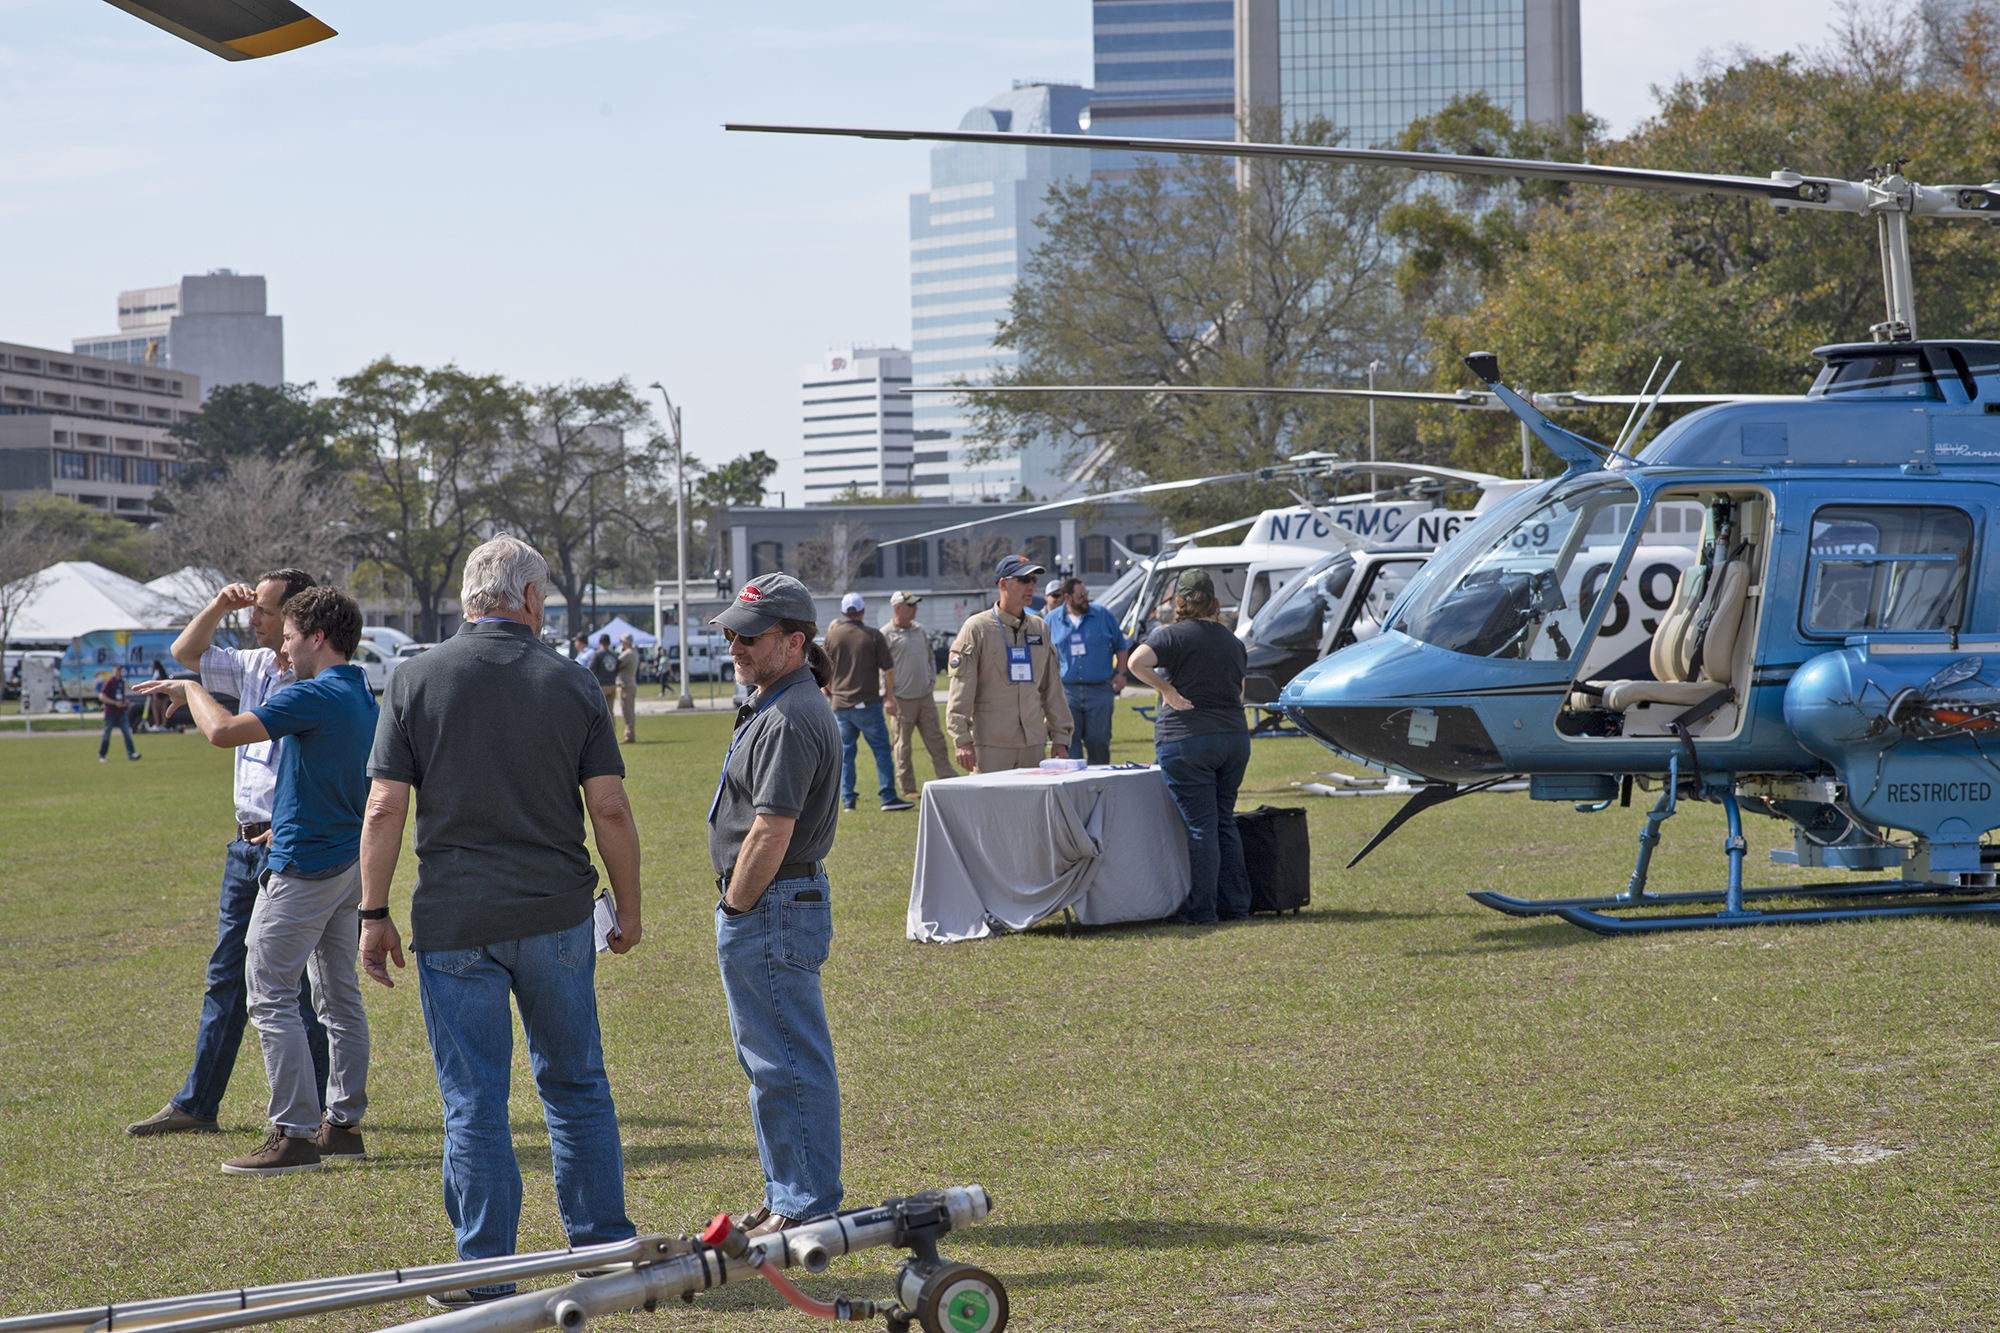 Helicopters made use of the lawn adjacent to the Hyatt Regency Jacksonville Riverfront Hotel for the American Mosquito Control Association 2022 Annual Meeting.